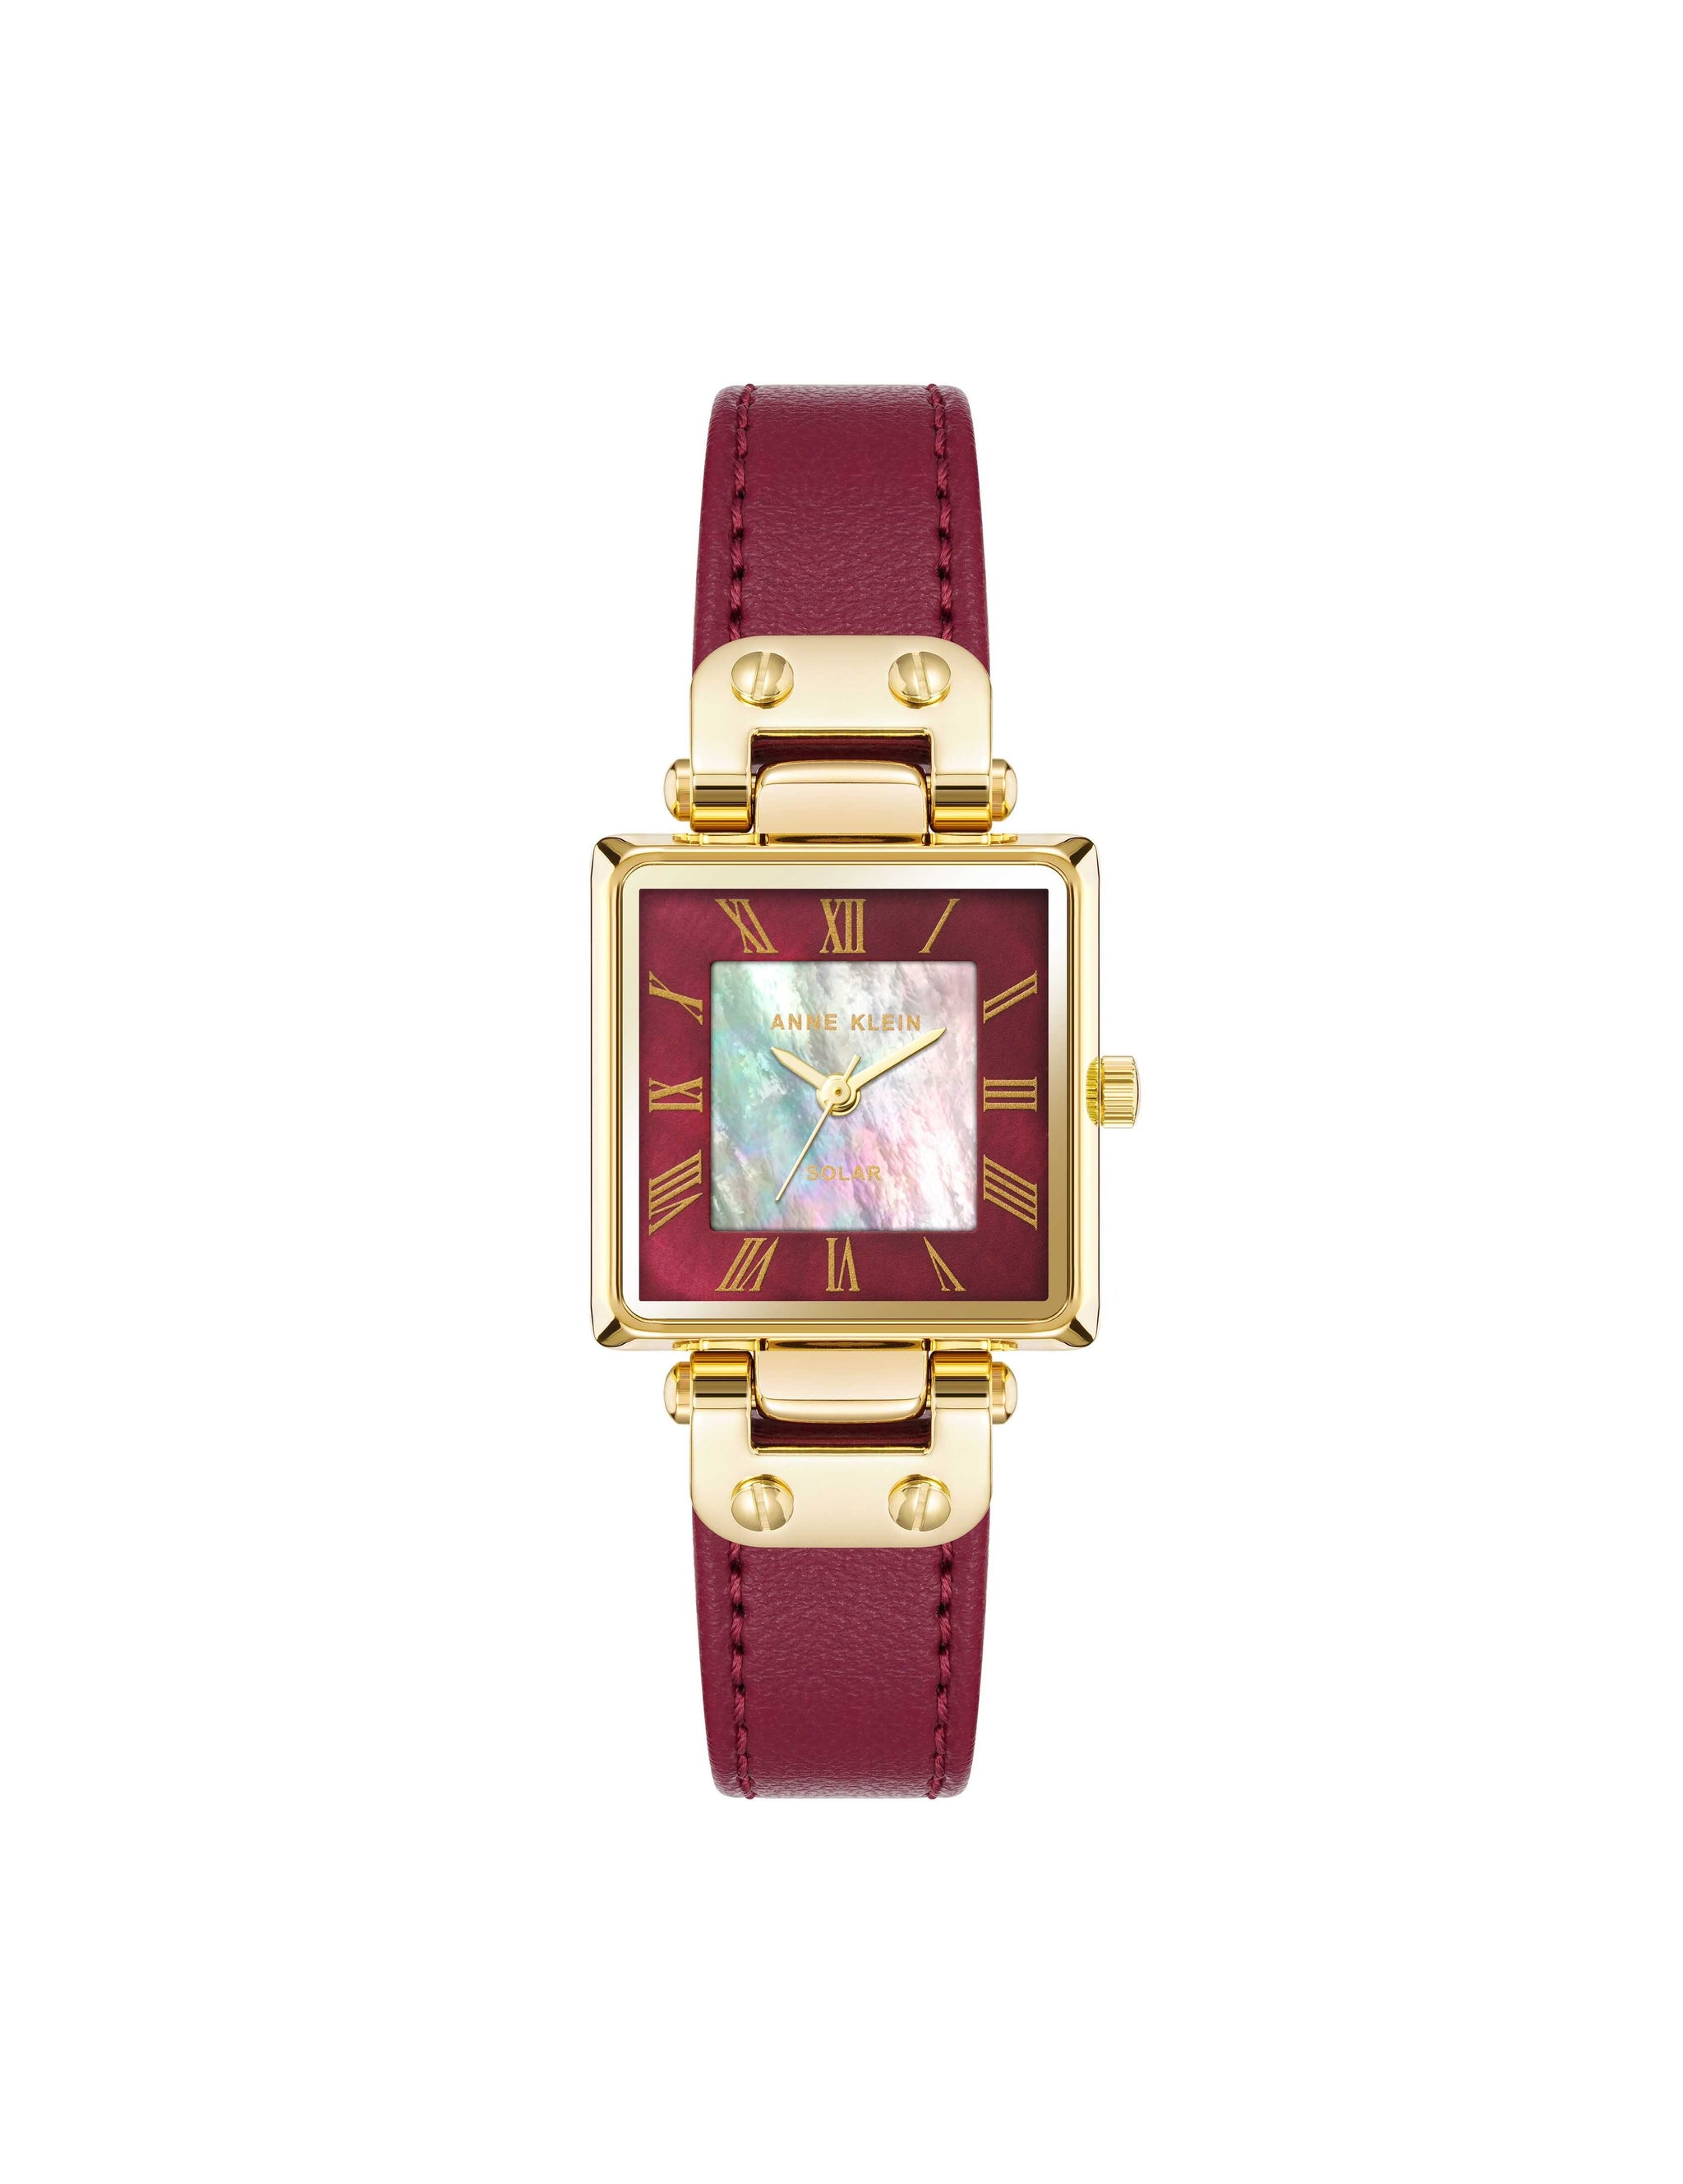 Considered Solar Square Leather Strap Watch Gold-Tone/Burgundy